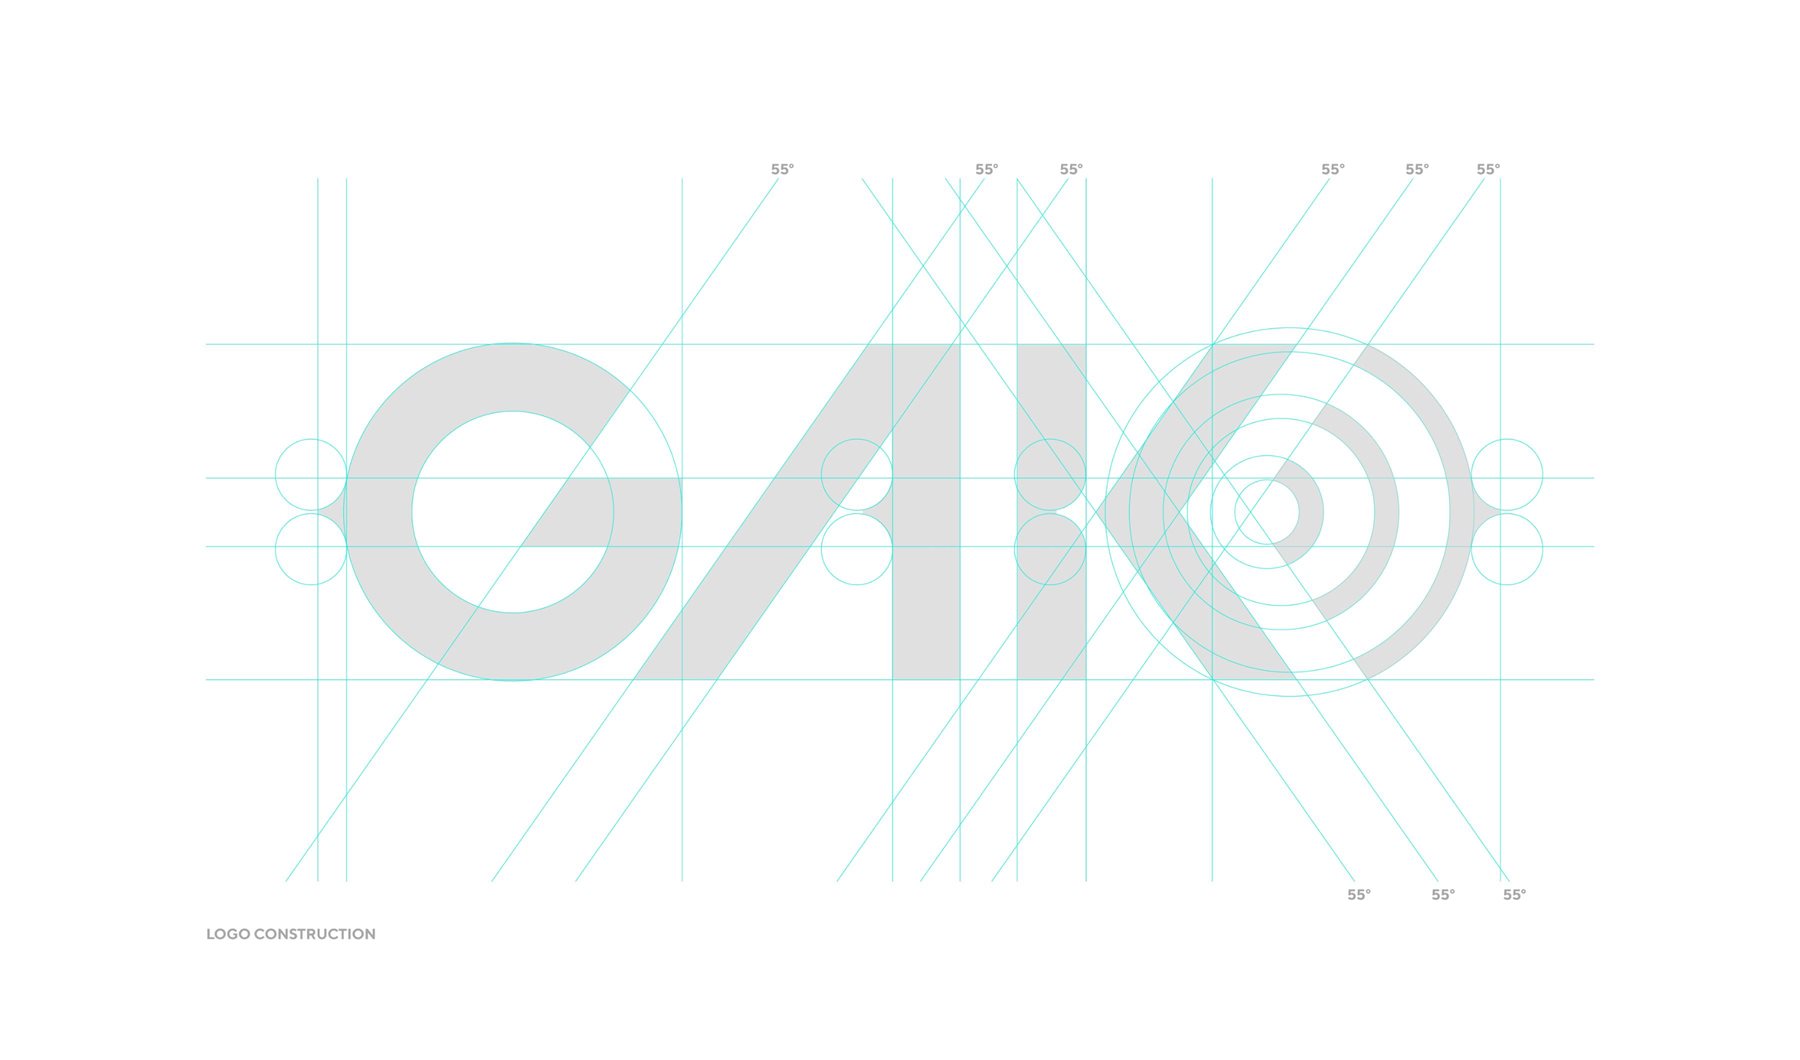 The Gak logo shown in a wireframe format indicating the shapes used when creating it